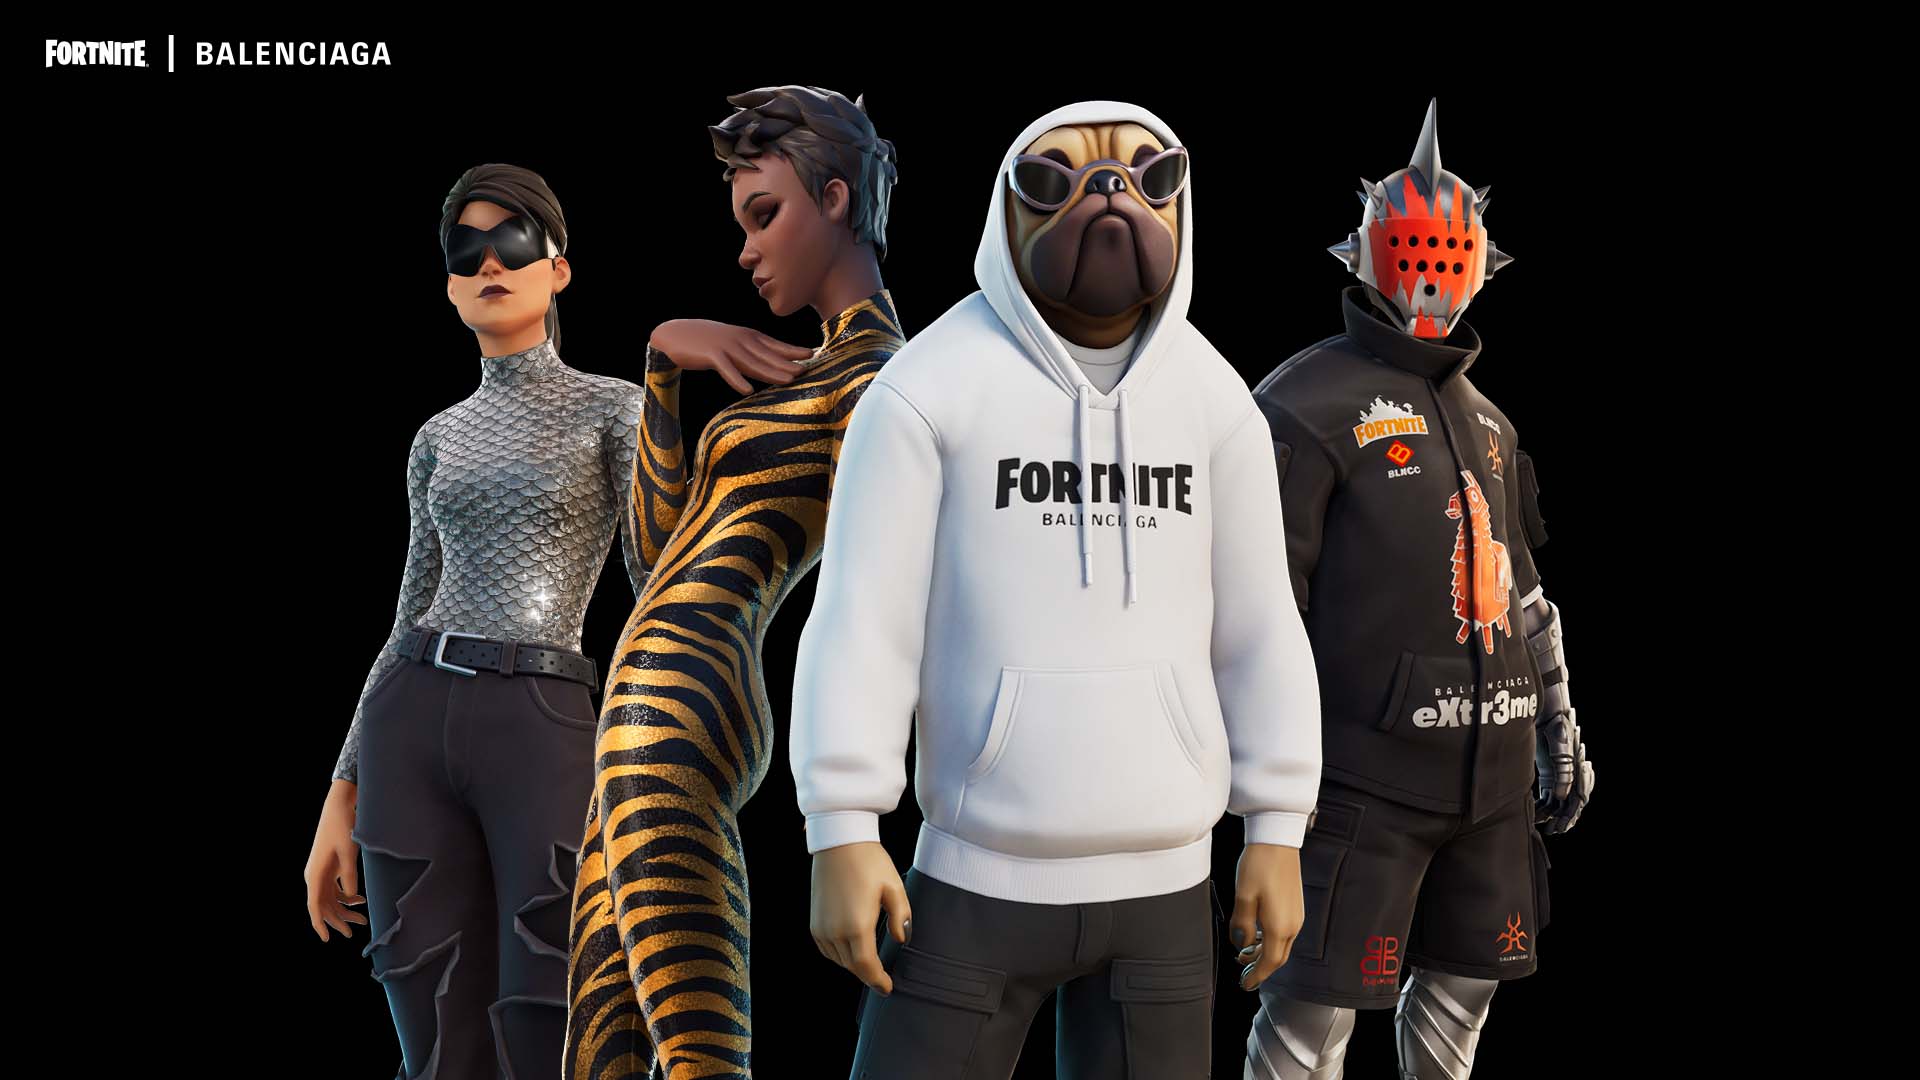 Balenciaga And Fortnite Team Up For A Digital To Physical Partnership